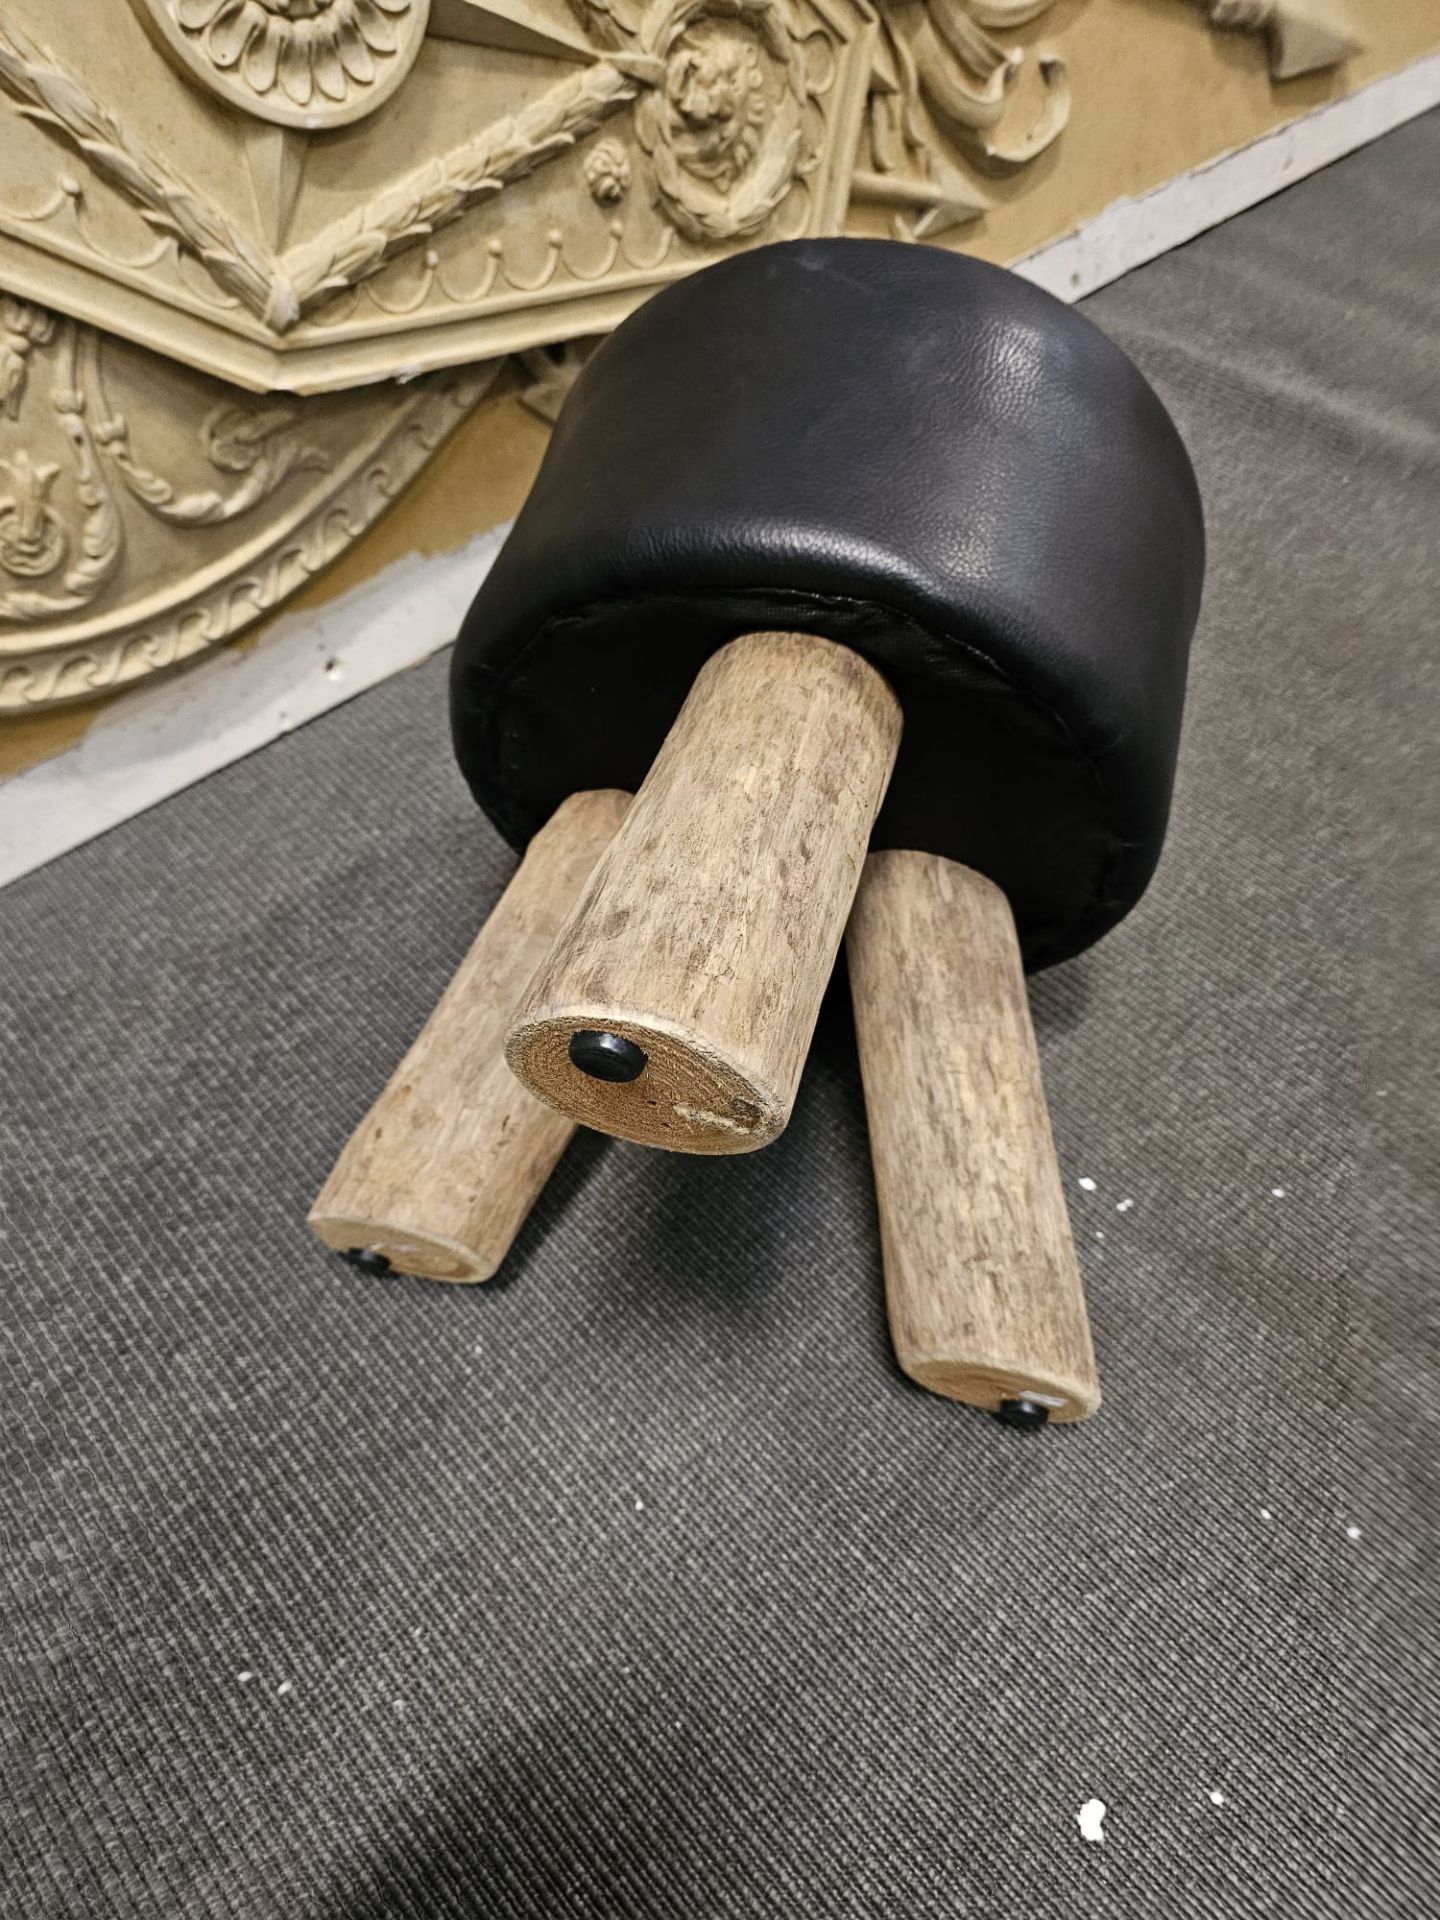 Bleu Nature F016 Mousse Driftwood And Leather Stool Finished In Matador Nero Hide Leather 380 x - Image 3 of 3